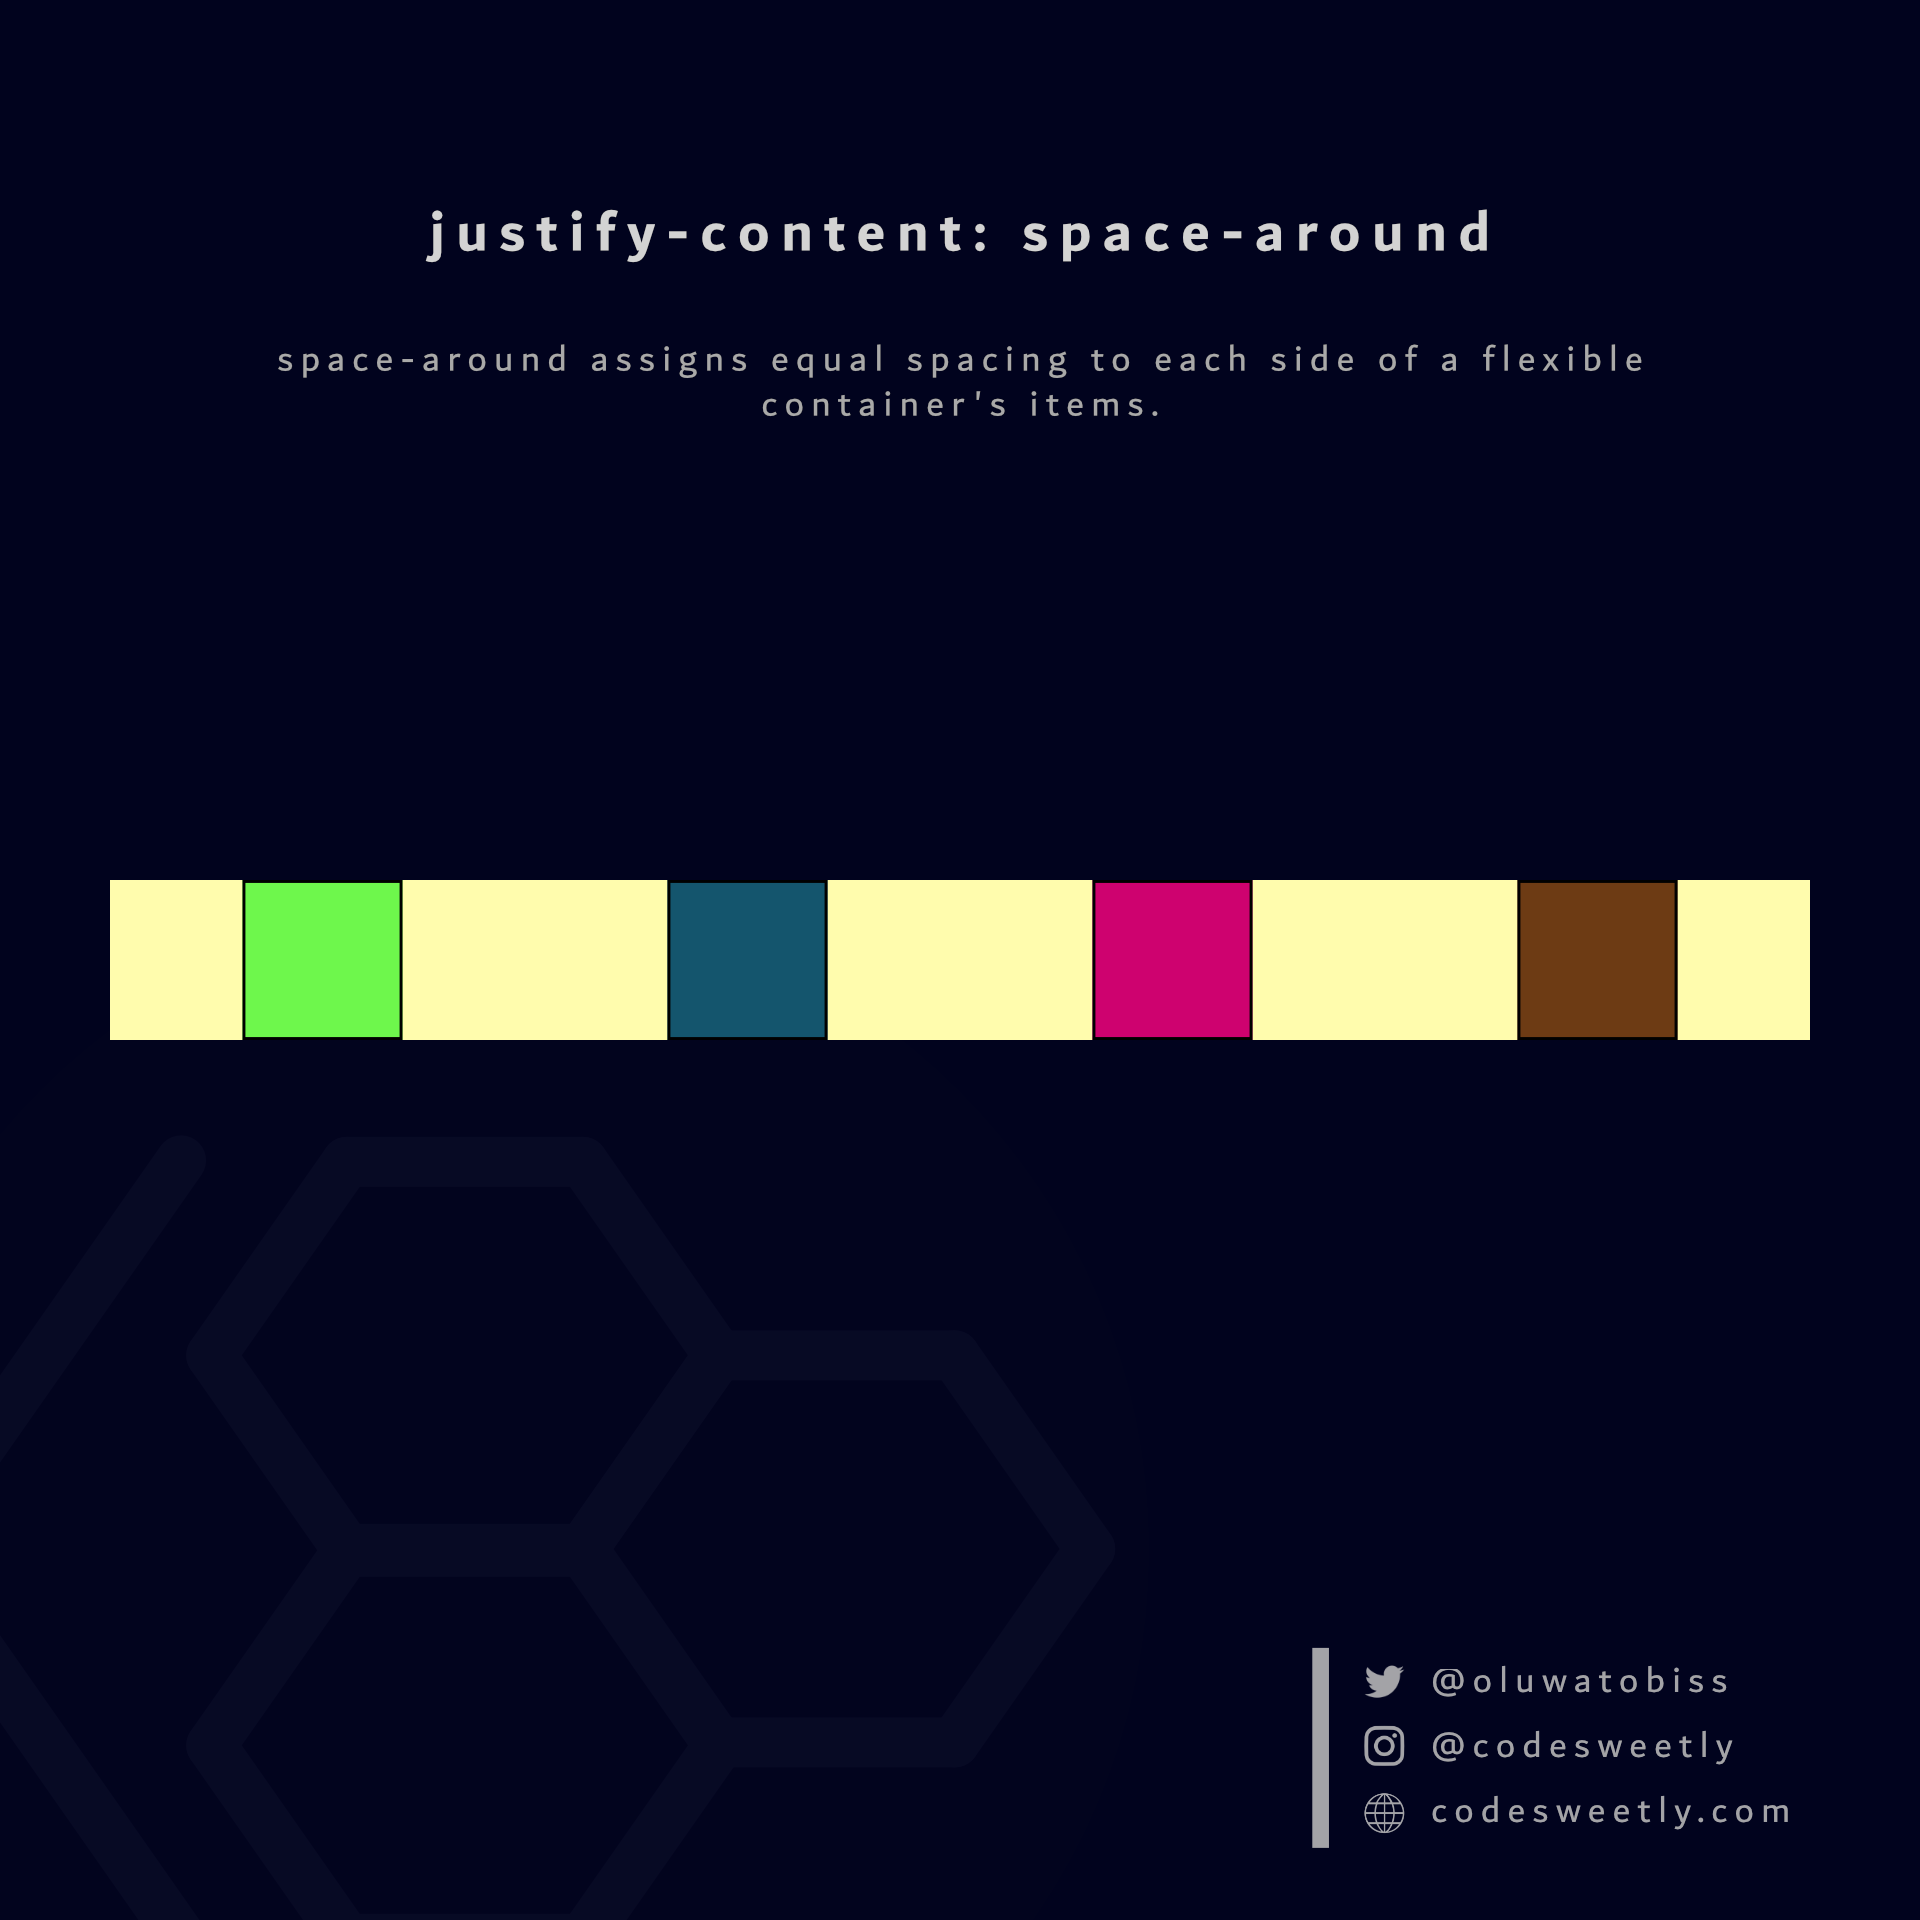 Illustration of justify-content's space-around value